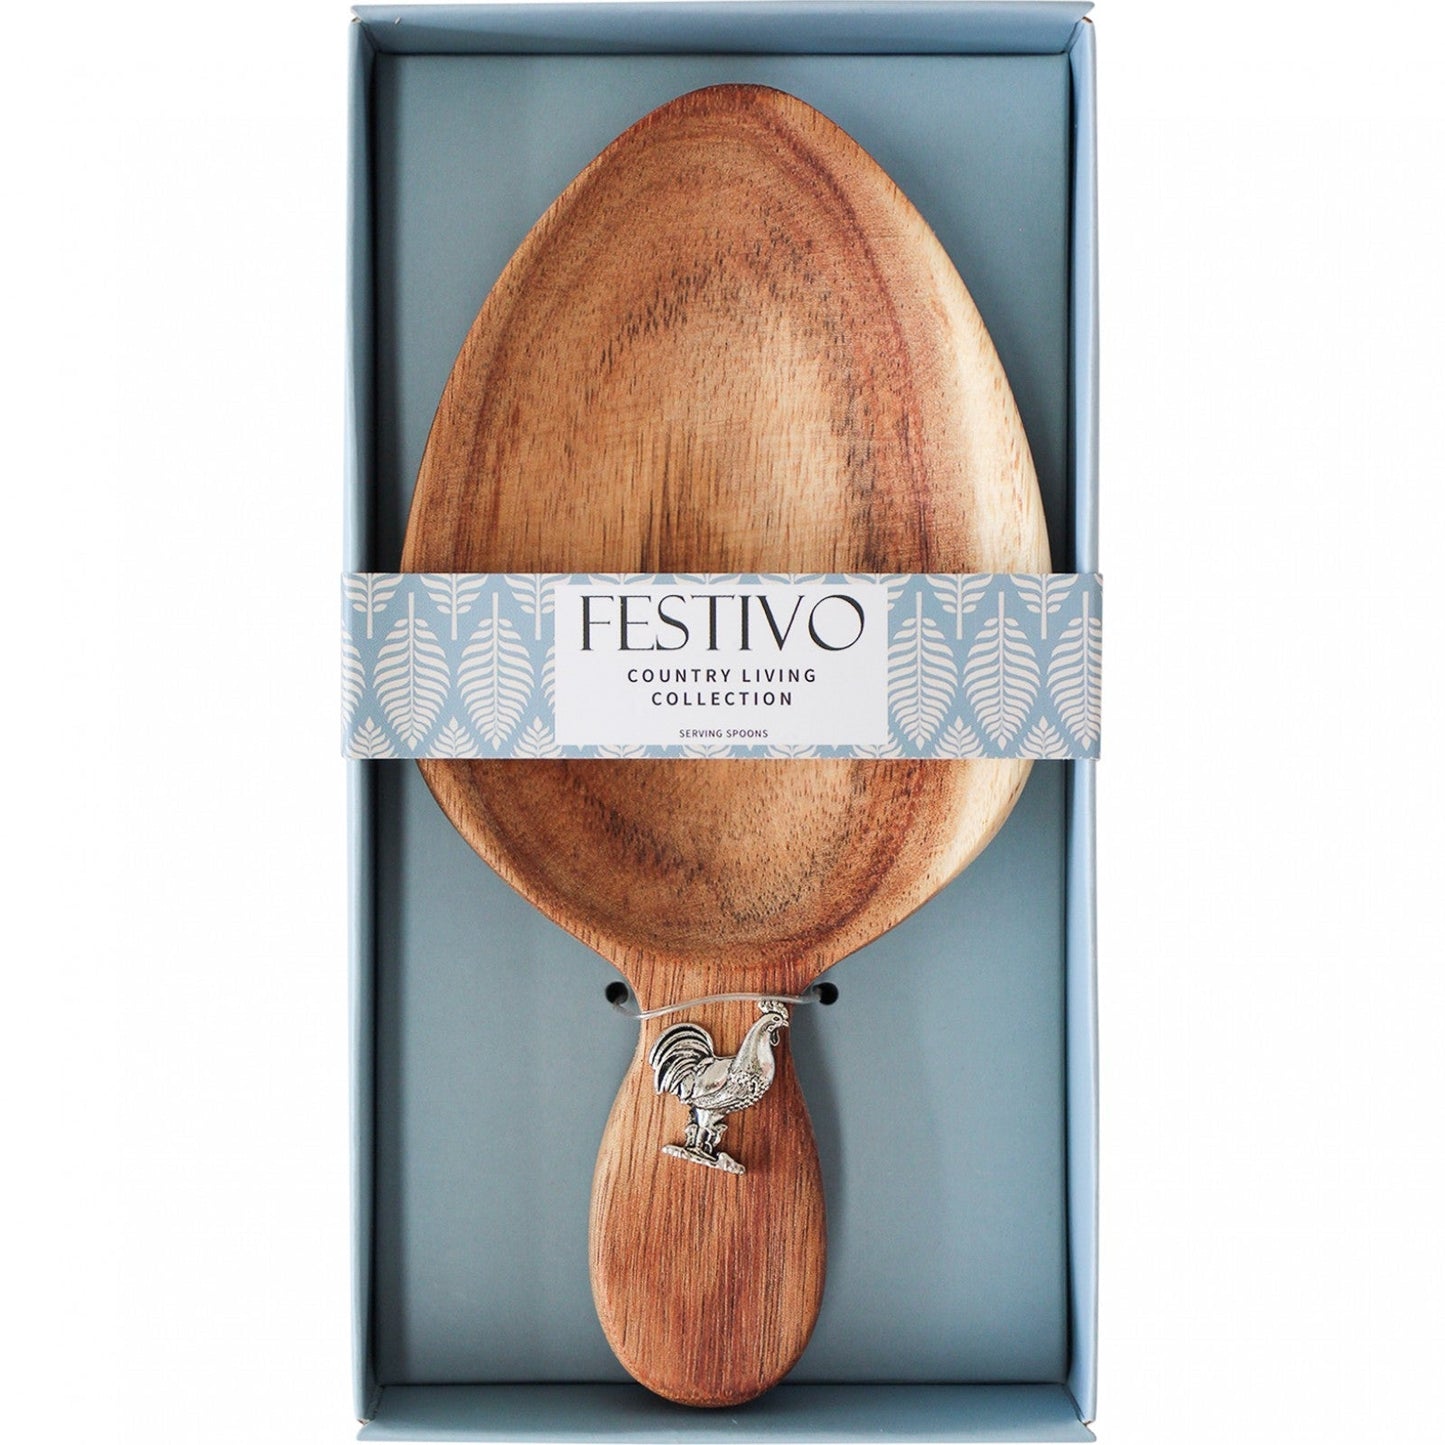 Rooster Chicken Wooden Spoon & Welcome Sign Gift - The Renmy Store Homewares & Gifts 